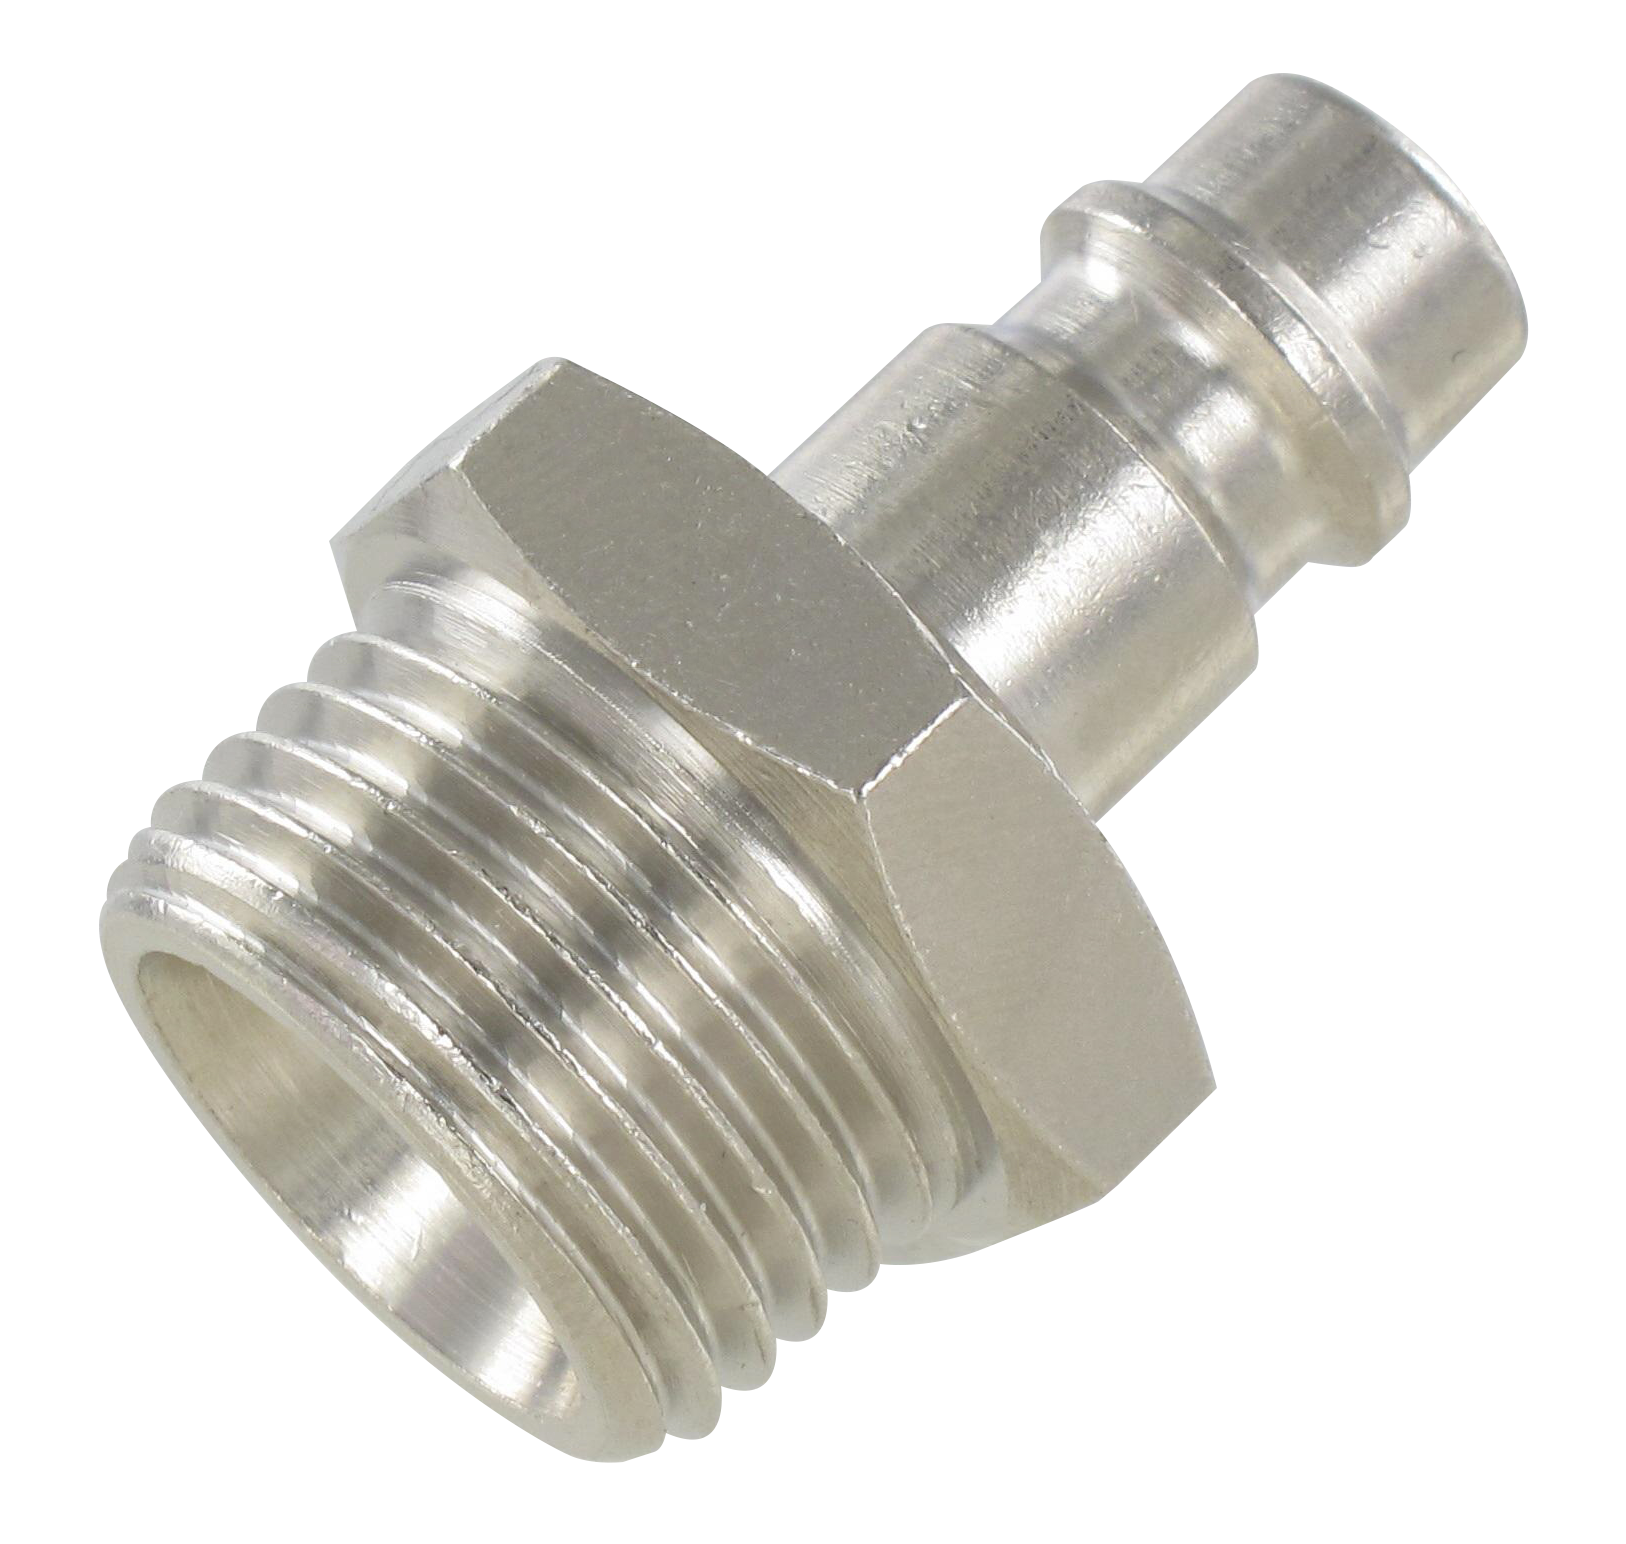 Nickel plated brass plugs EURO MALE PLUG - PARALLEL Fittings and quick-connect couplings